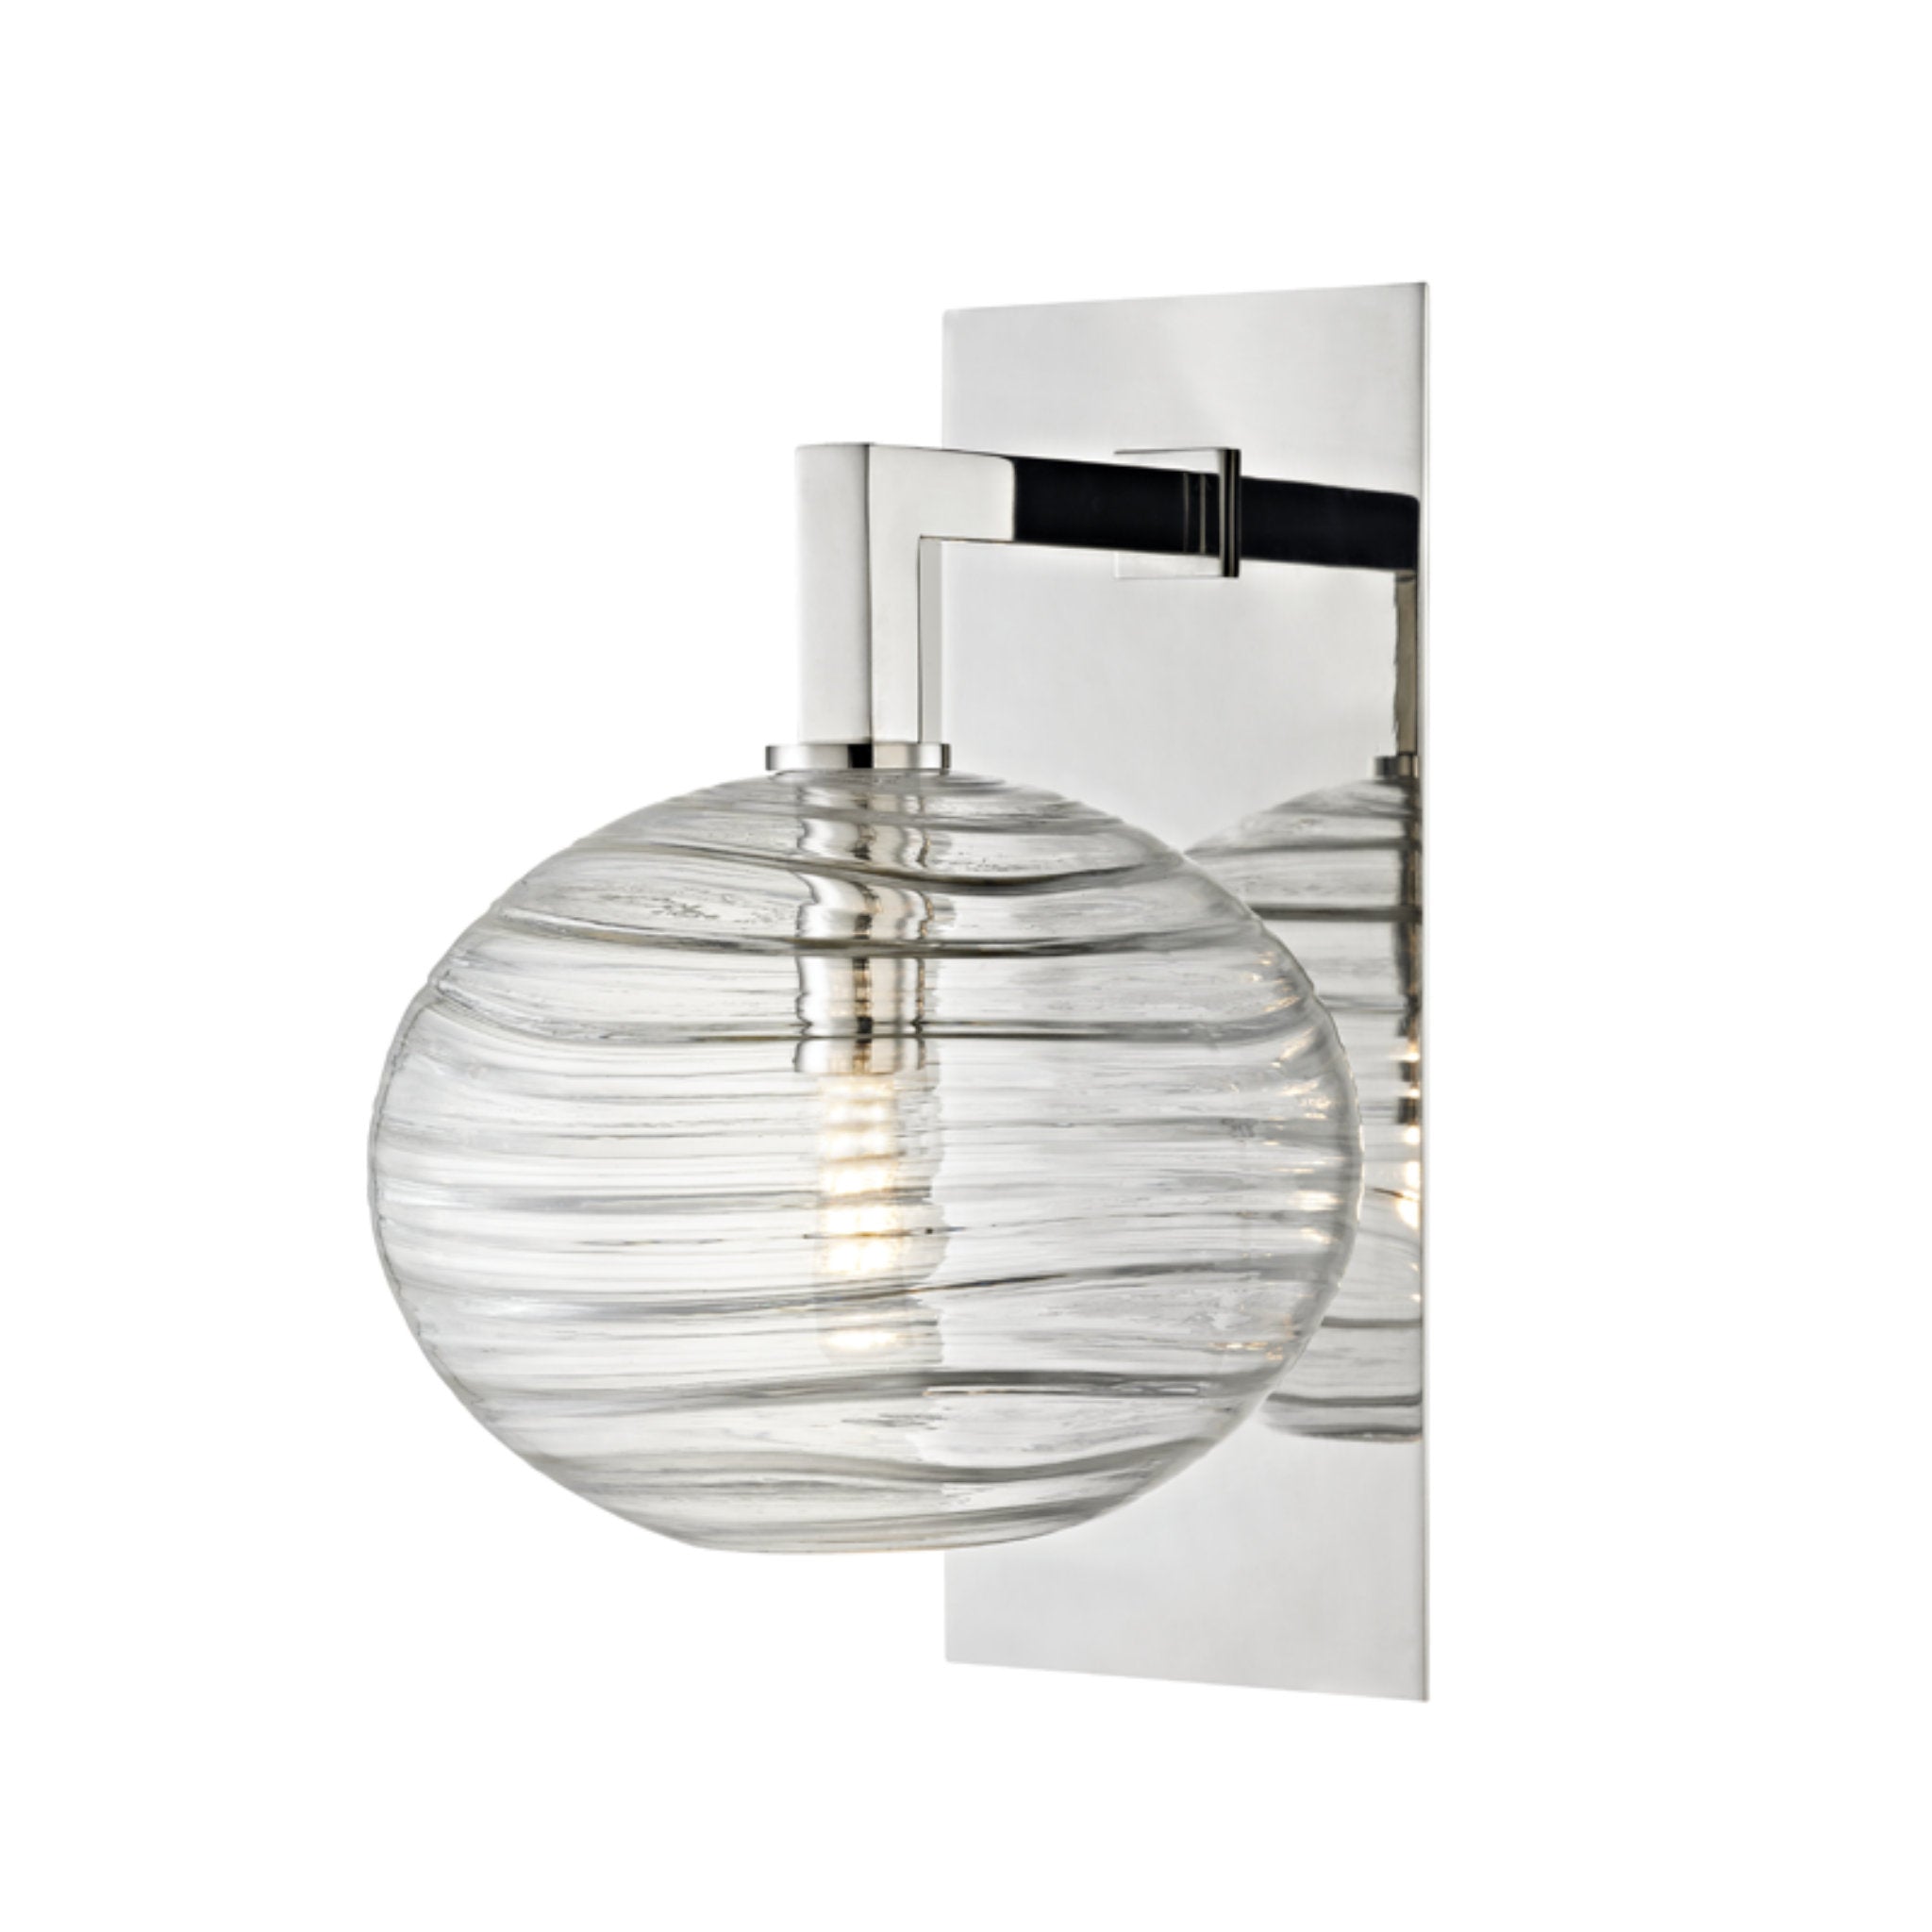 Breton 1 Light Wall Sconce in Polished Nickel